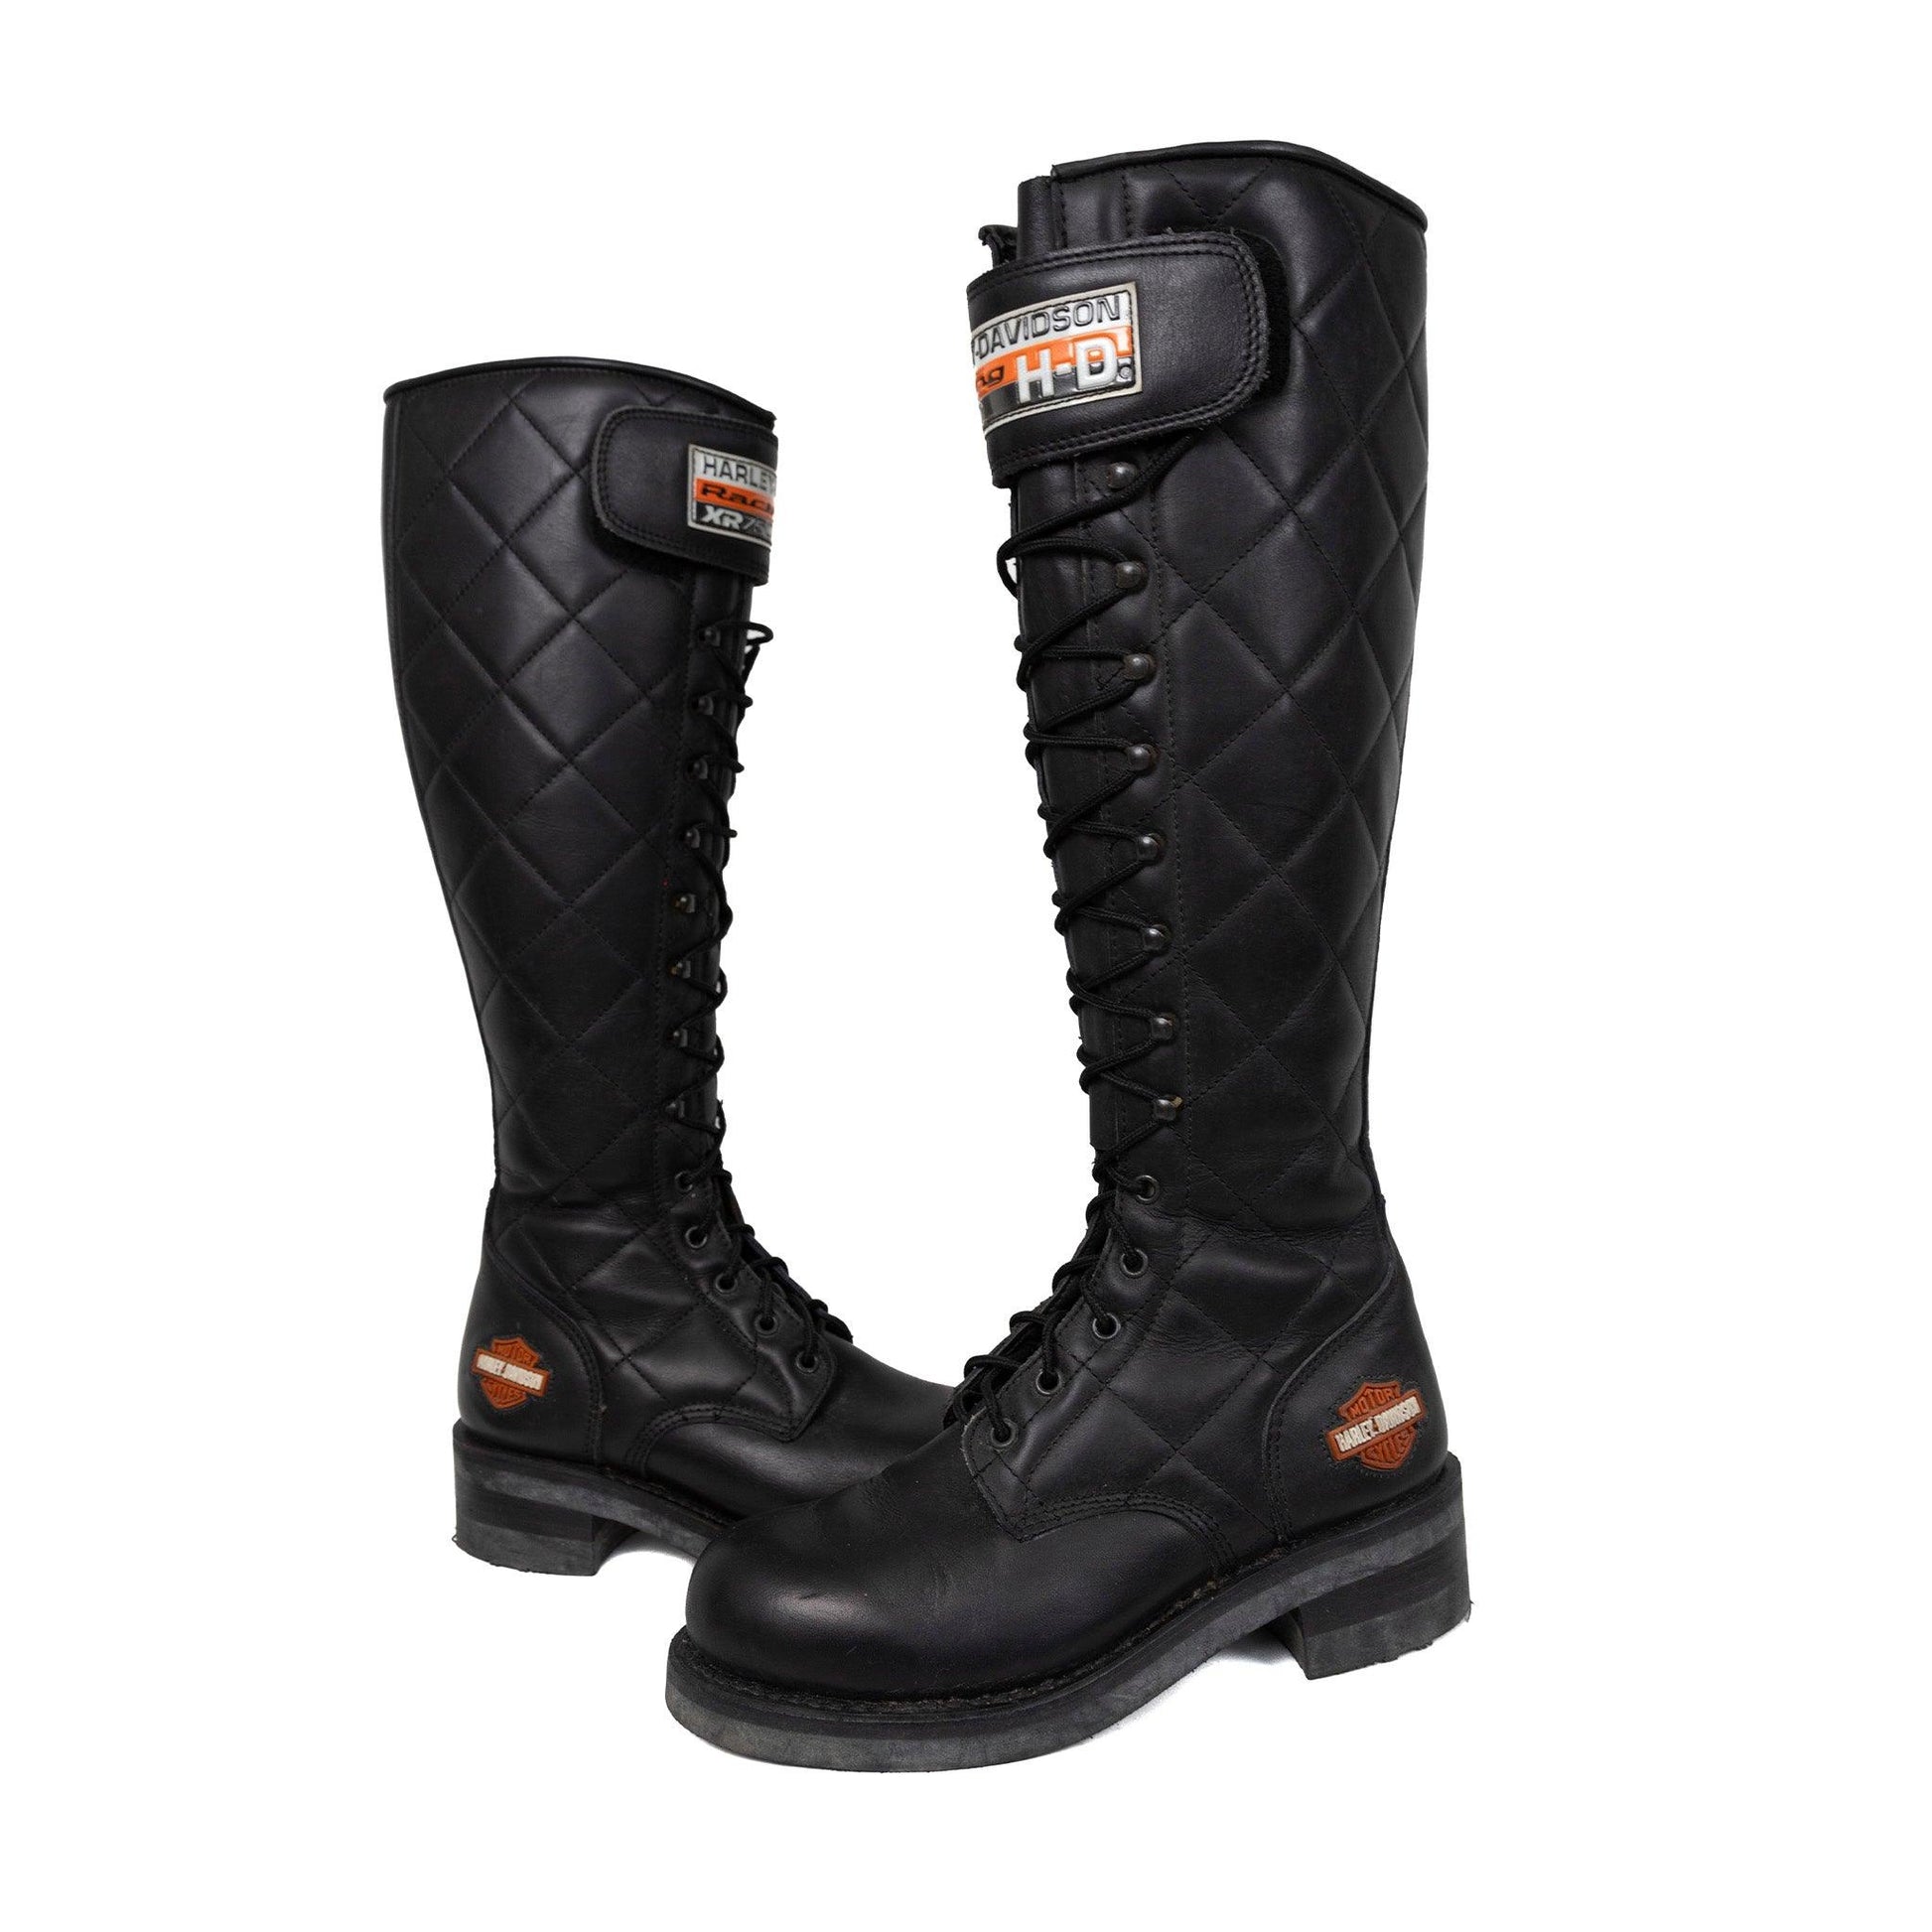 Harley Davidson Racing XR750 Lace Up Biker Boots - Known Source